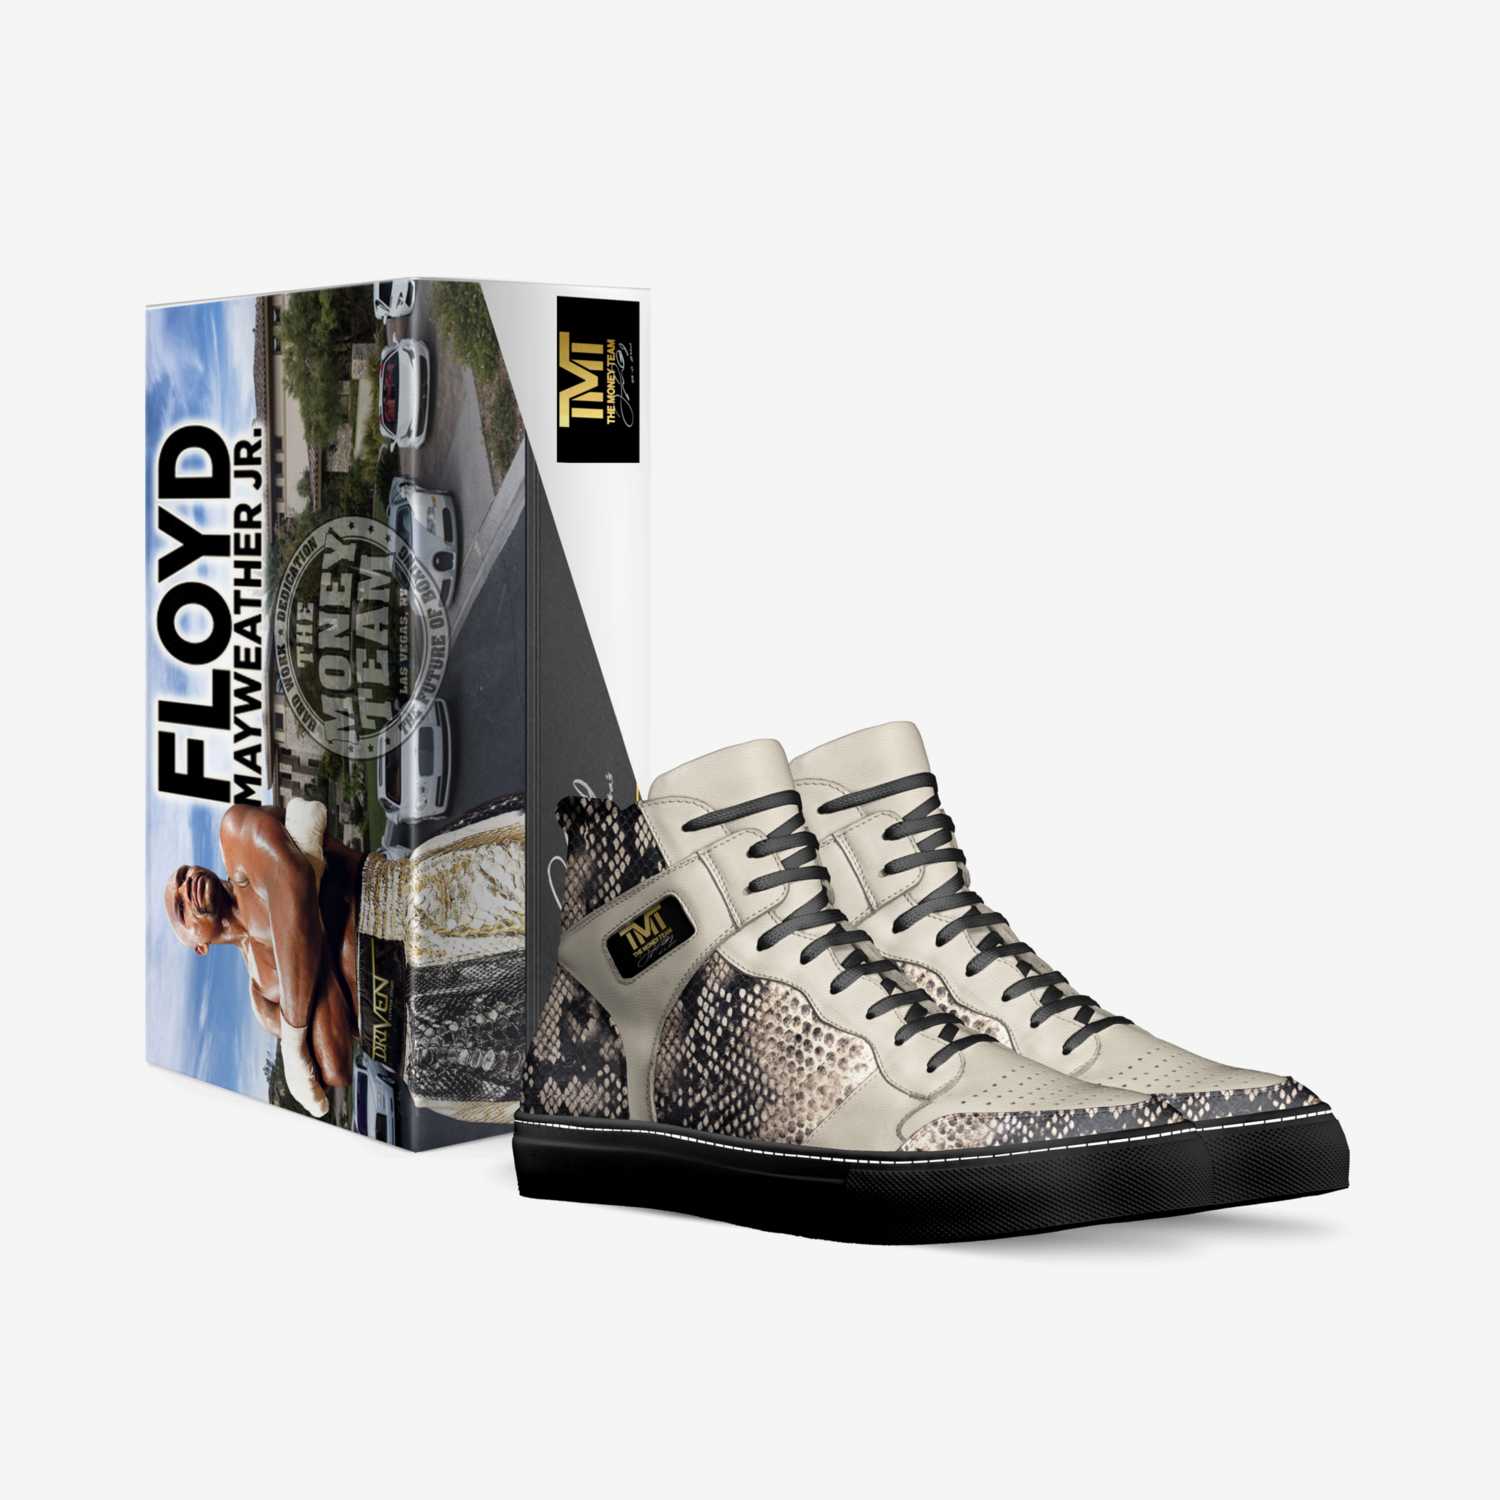 team money custom made in Italy shoes by Jason Oberly | Box view